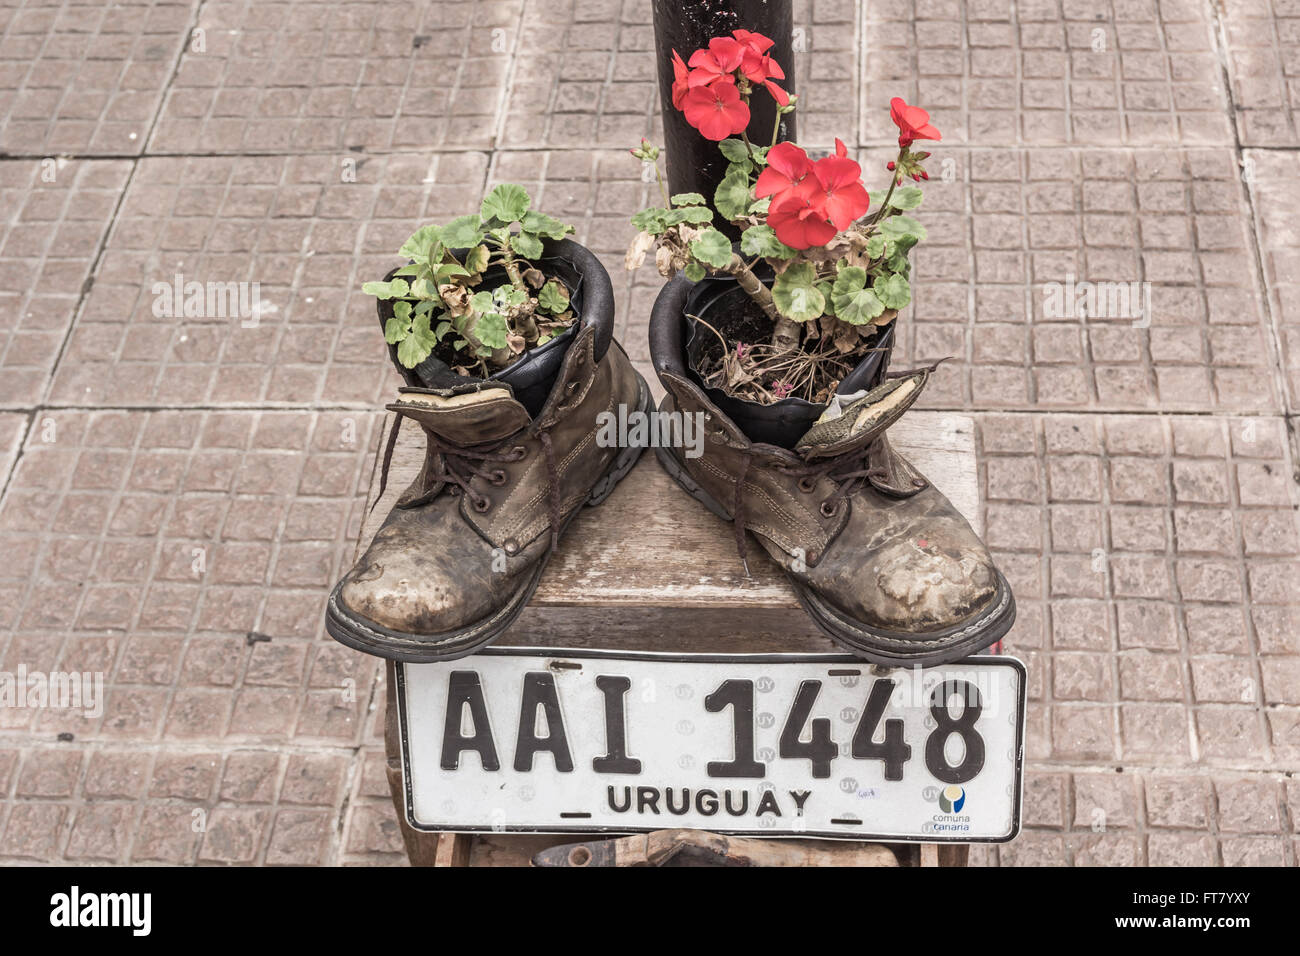 FLOWERS GROWING IN BOOTS, MONTIVIDEO, URUGUAY - CIRCA DECEMBER 2015. Old boots being used as flower planters. Stock Photo